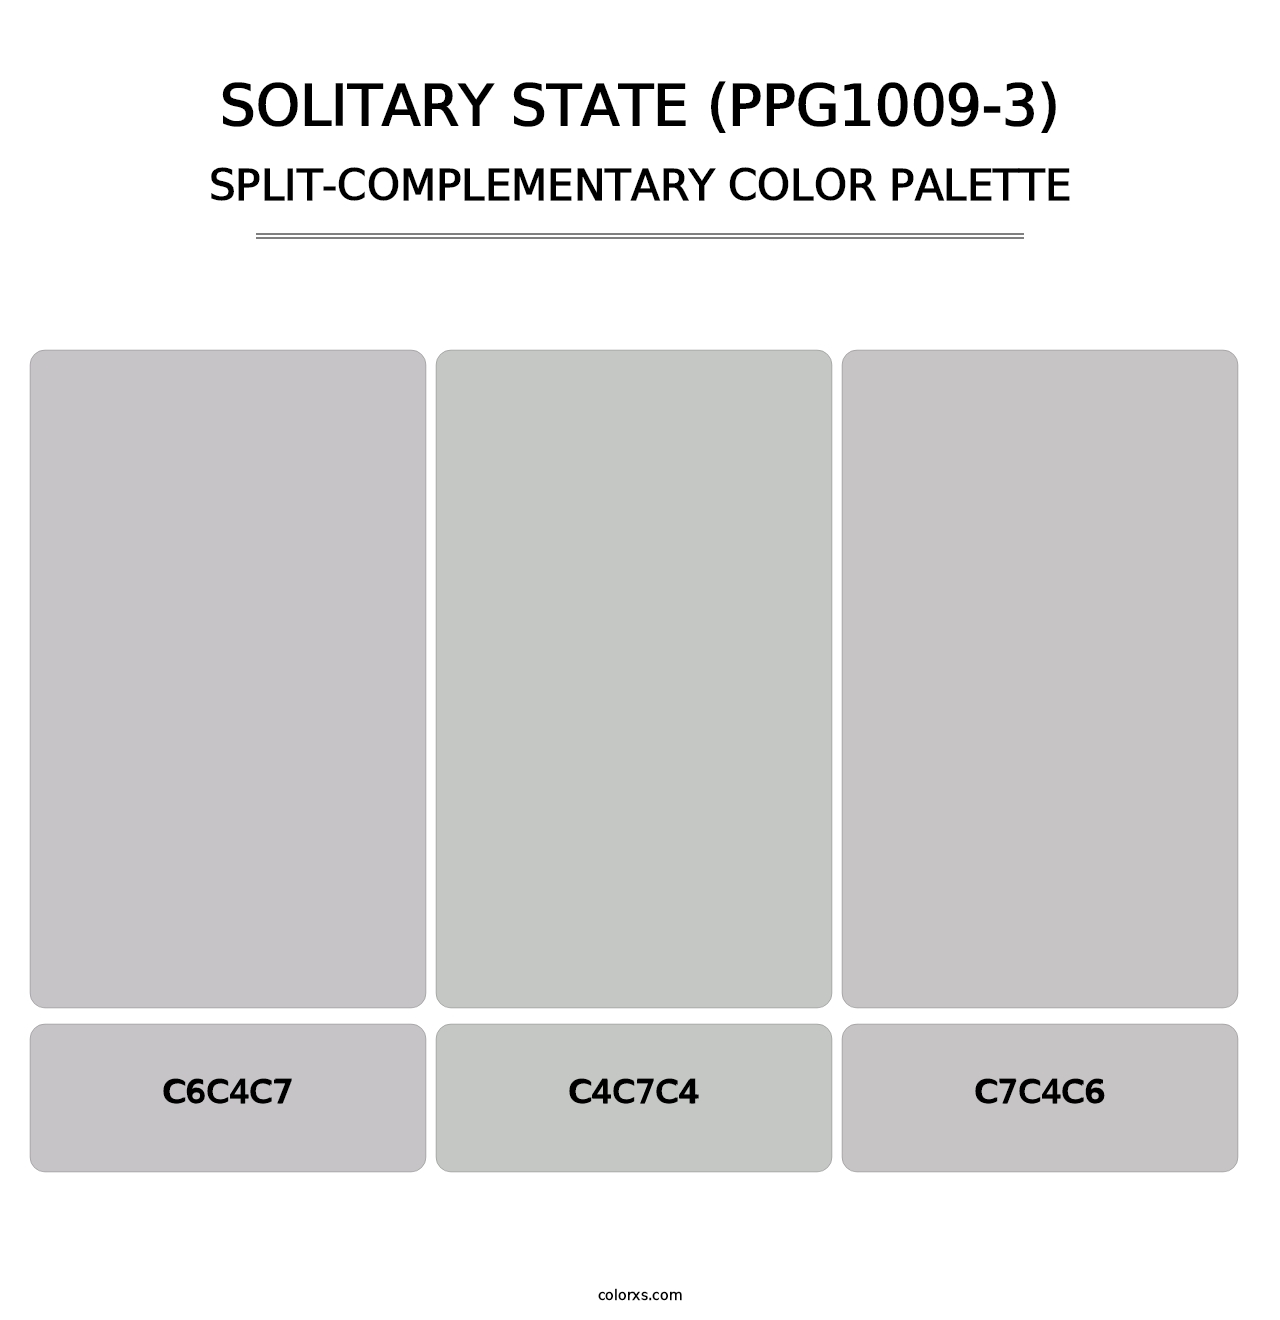 Solitary State (PPG1009-3) - Split-Complementary Color Palette